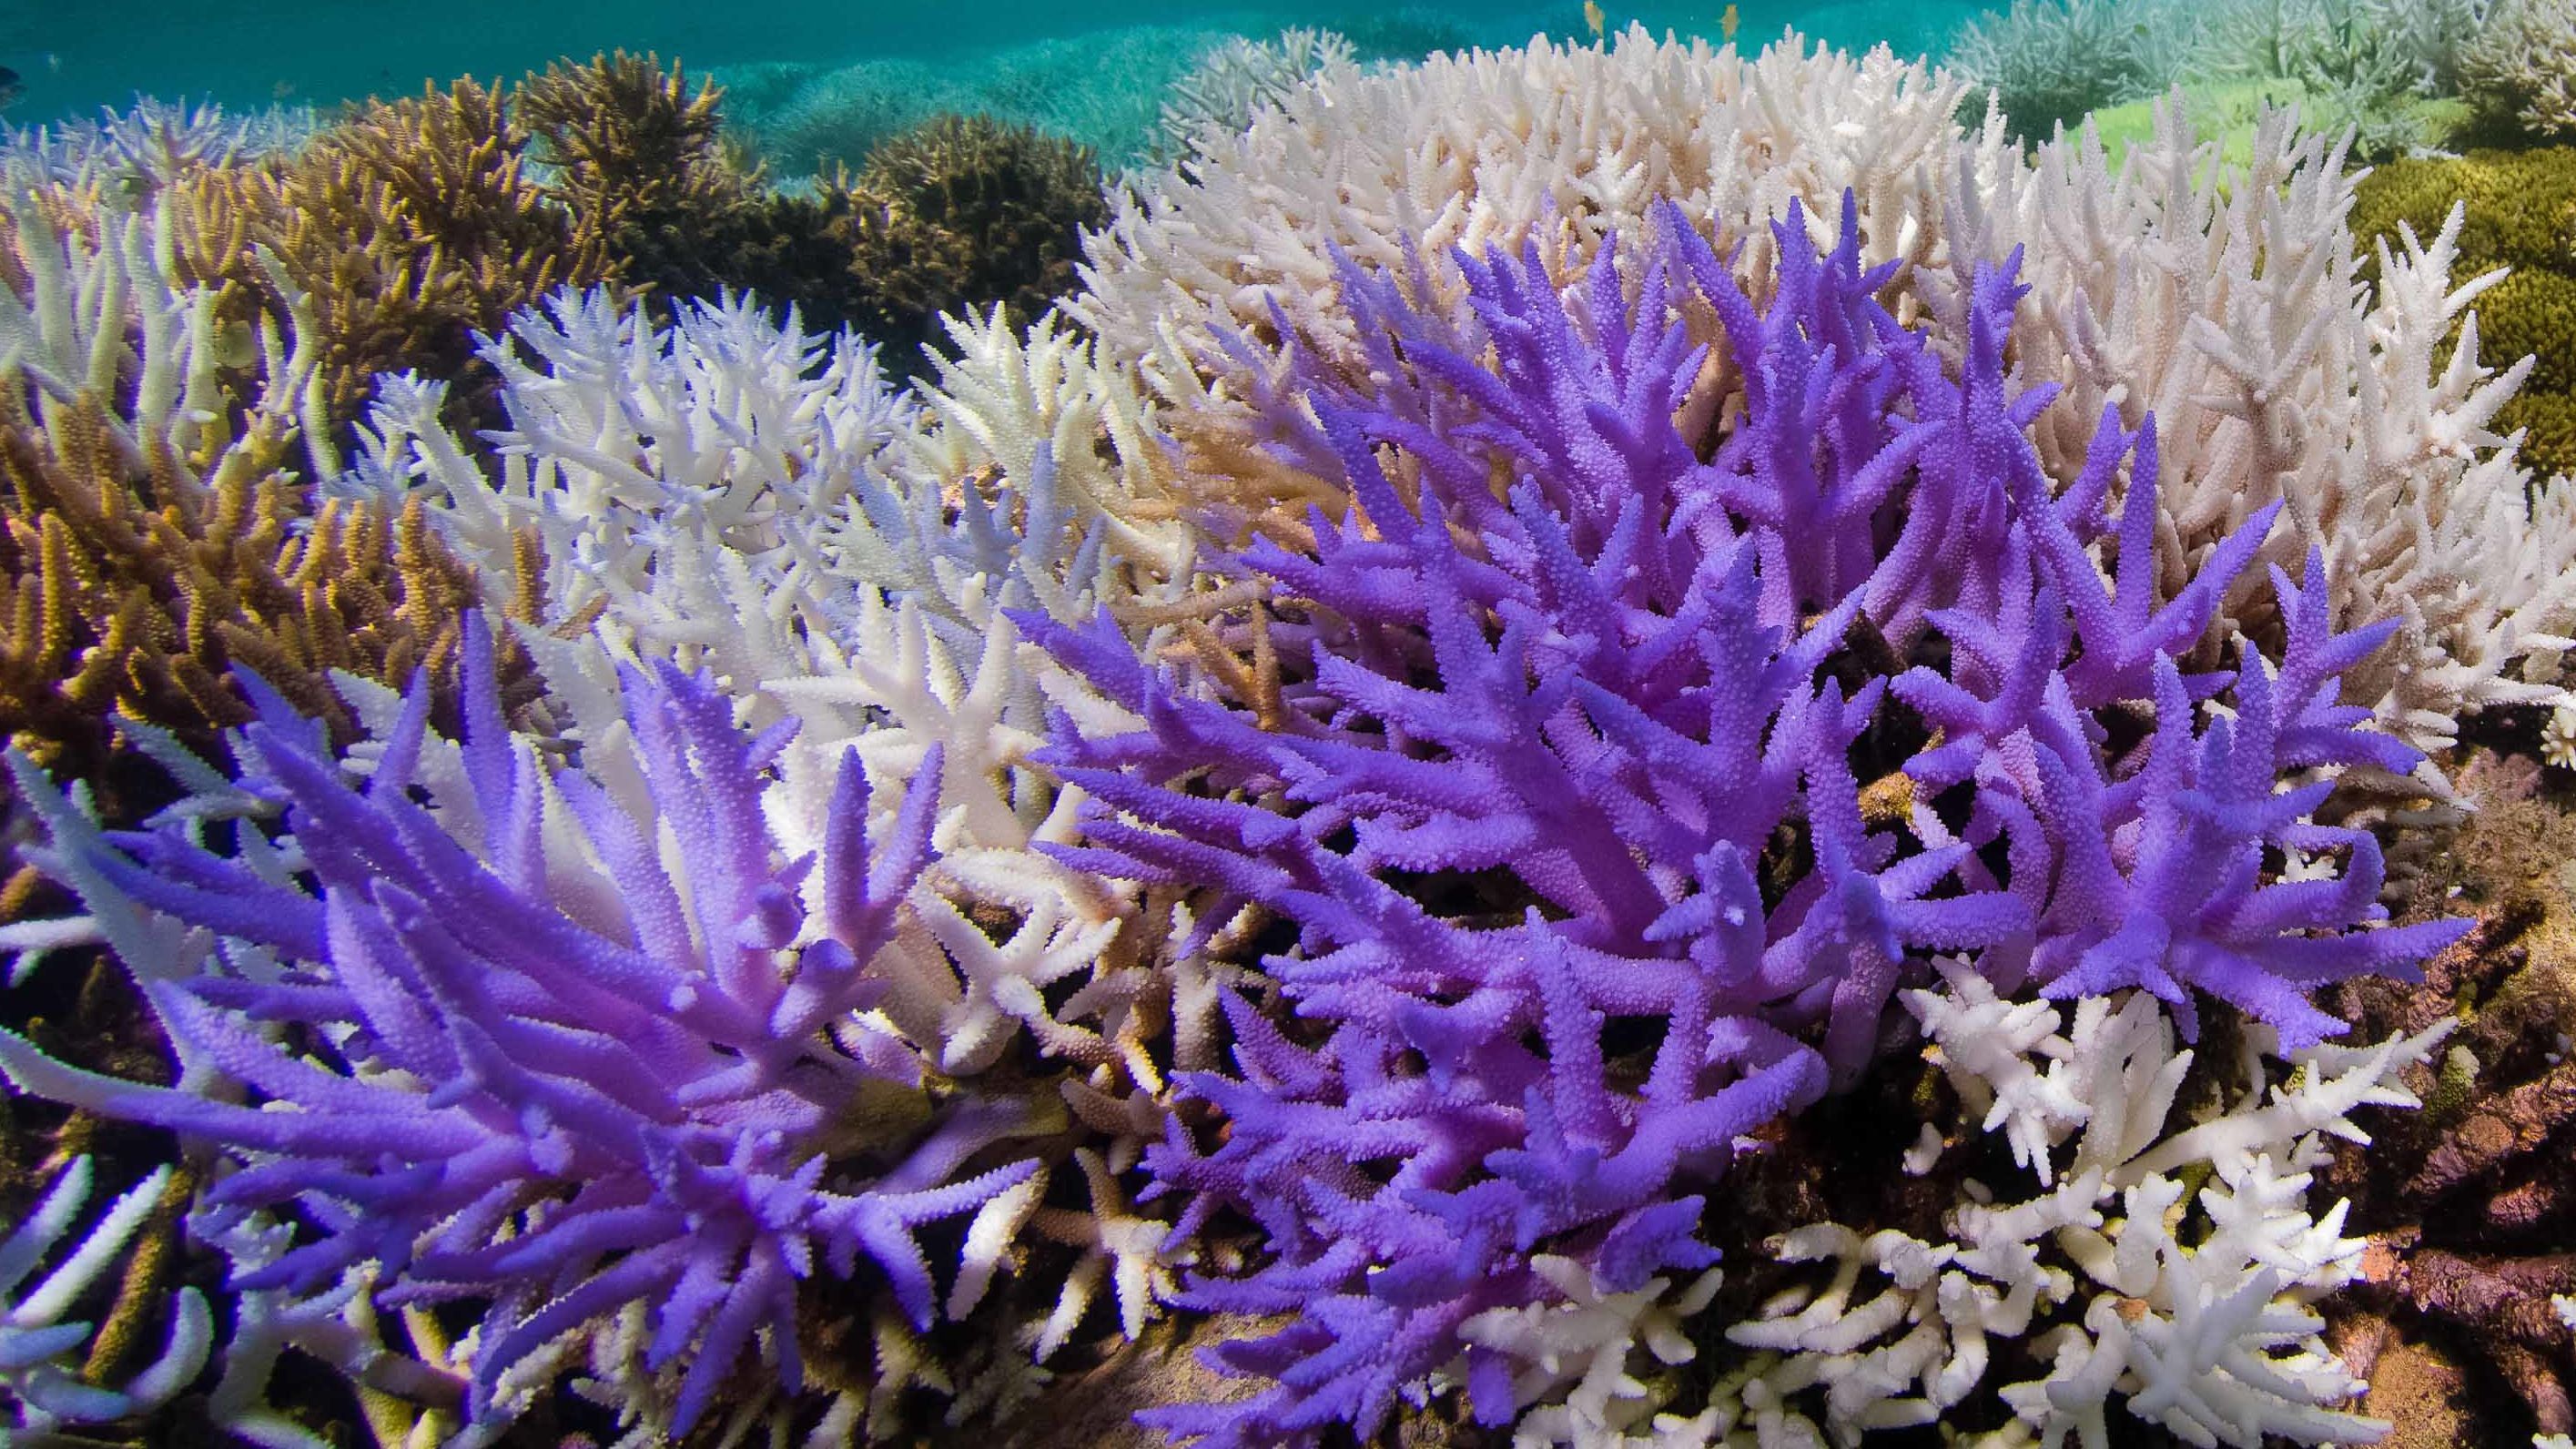 Acropora corals experienced colorful bleaching in the New Caledonian barrier reef, located in New Caledonia in the South Pacific, in 2016.